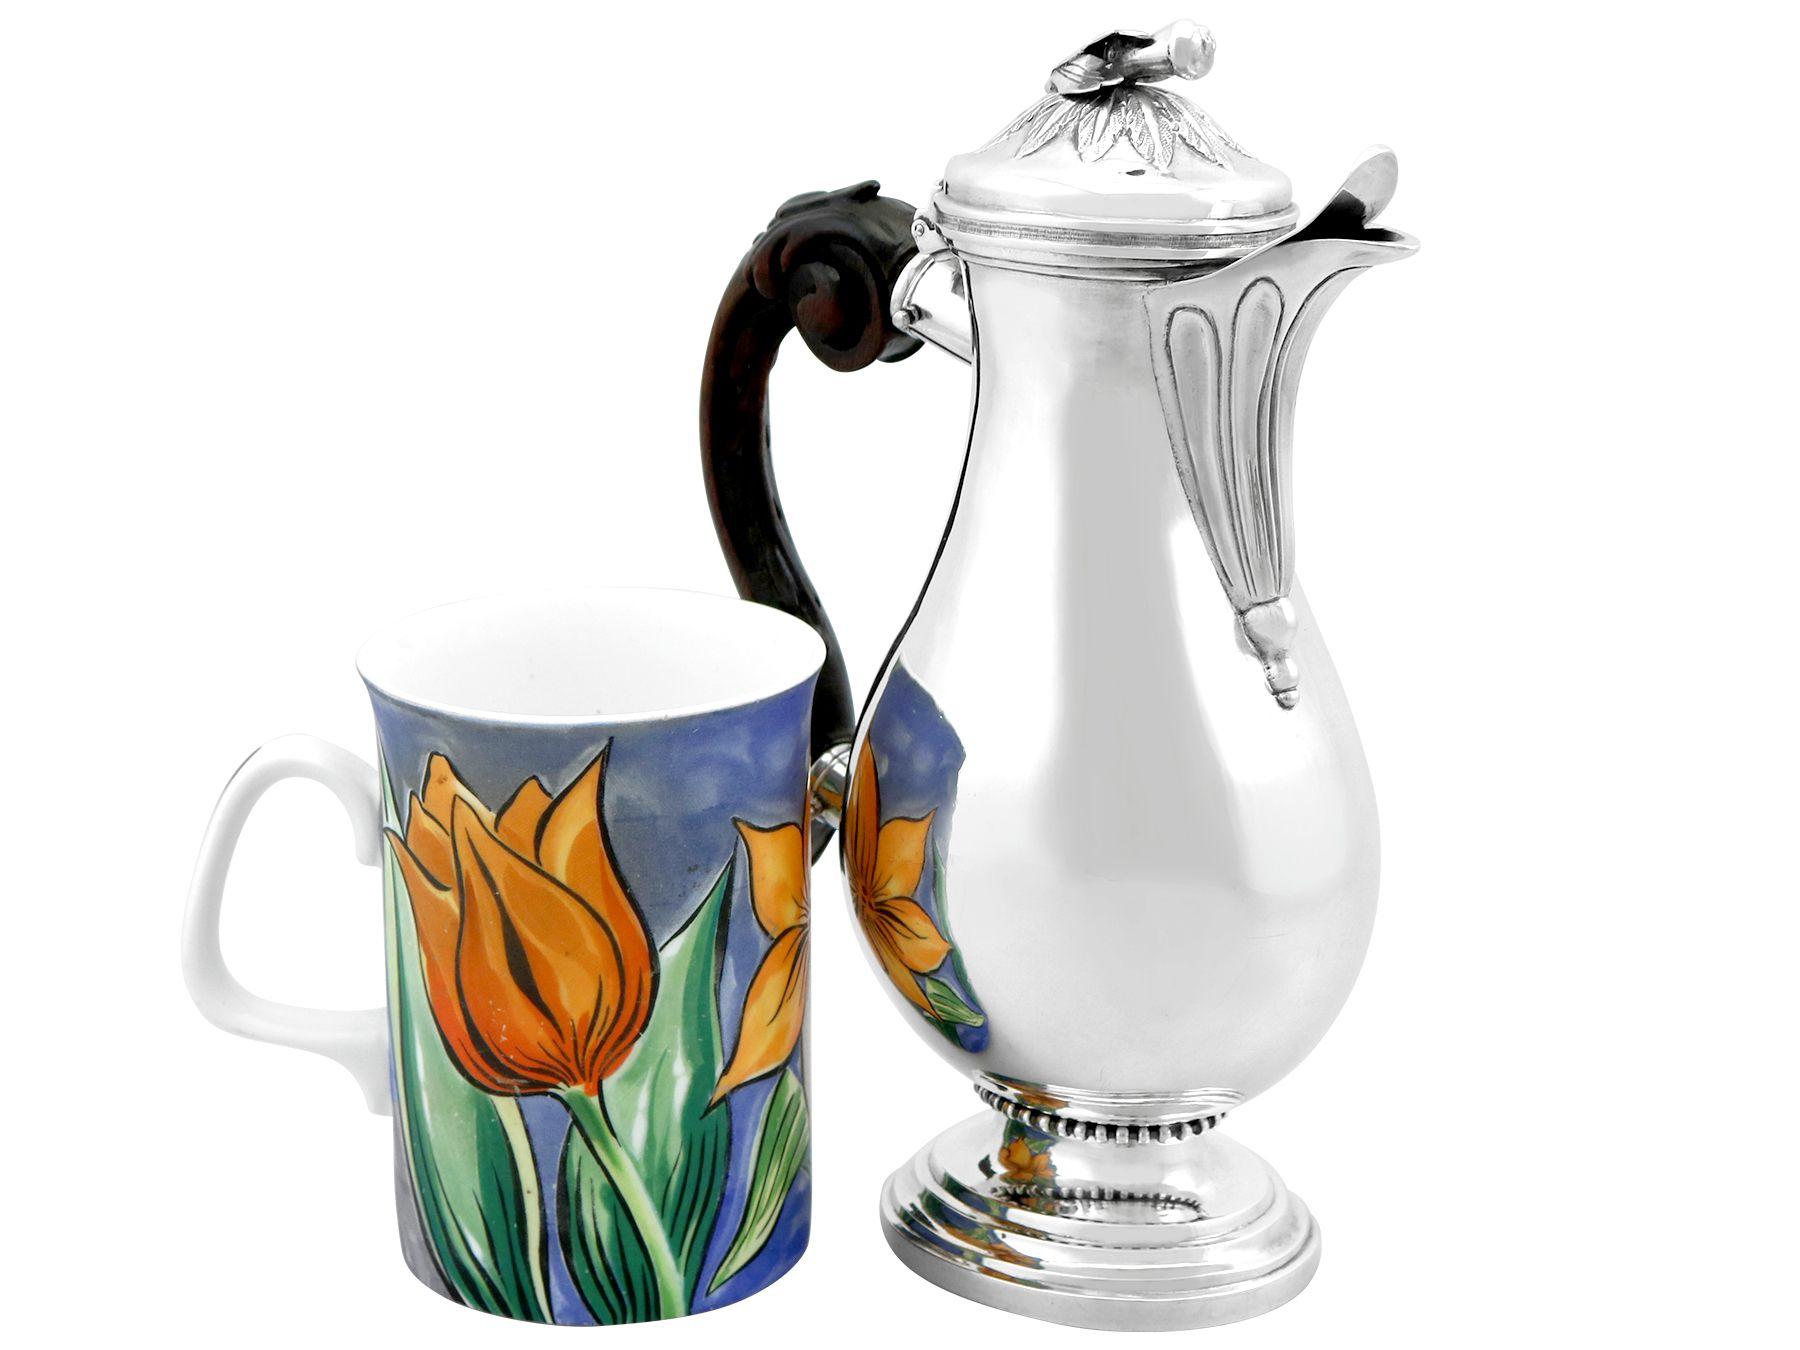 An exceptional, fine and impressive antique Swiss silver coffee jug; an addition to our 18th century silver teaware collection

This exceptional antique Swiss silver coffee jug has an oval baluster form onto an oval pedestal foot.

The surface